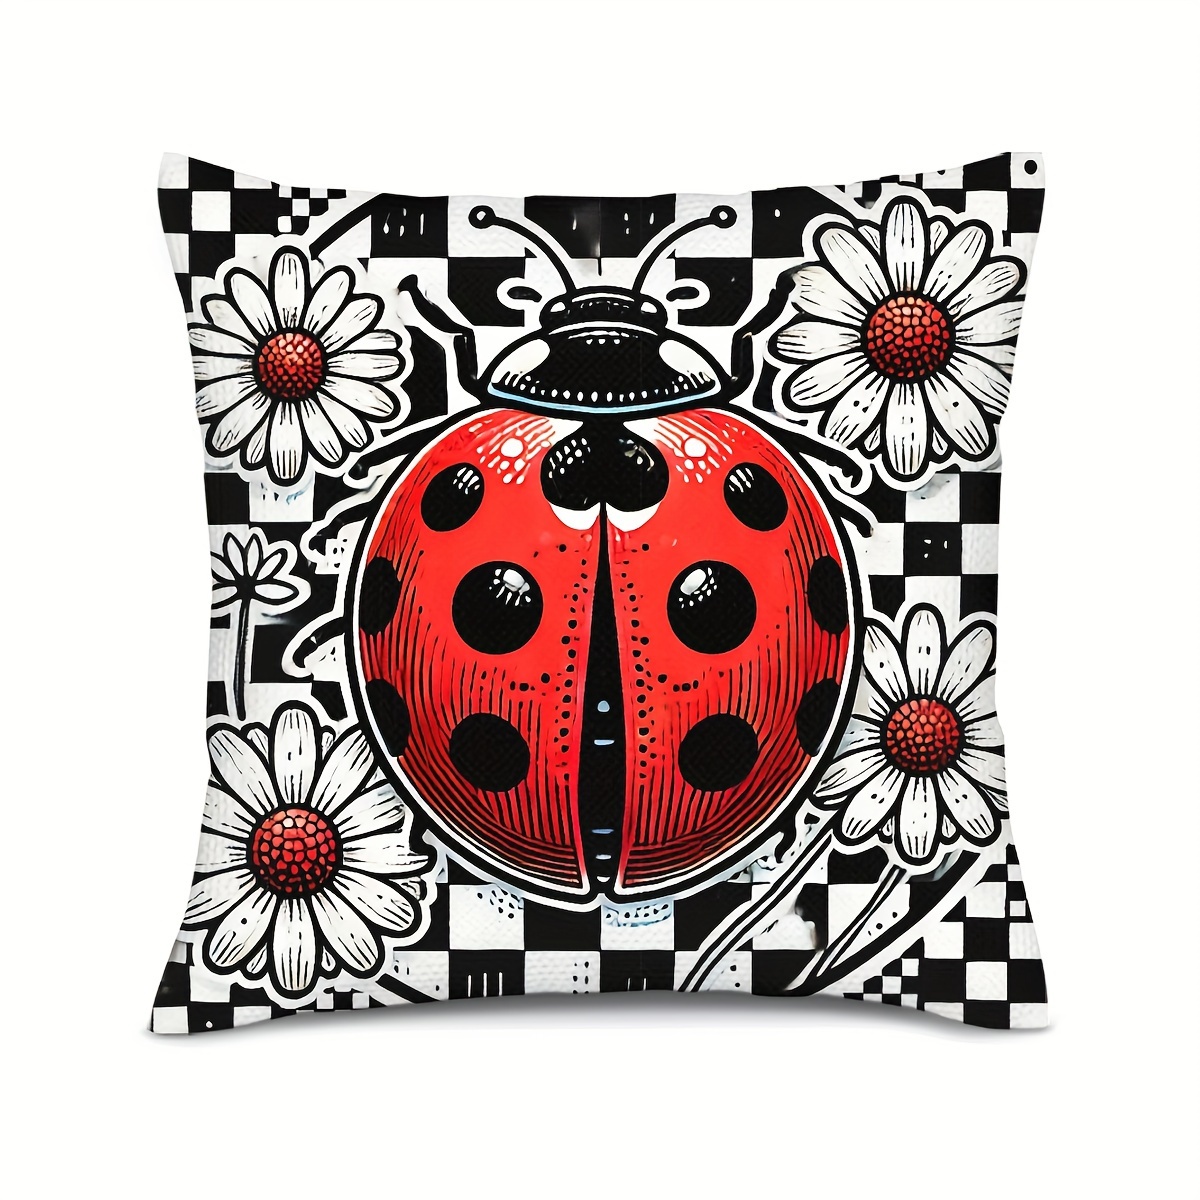 

Charming Ladybug 18x18" Polyester Throw Pillow Cover - Allergy-friendly, Zip Closure, Machine Washable For Living Room & Bedroom Decor (double-sided Print, Insert Not Included)